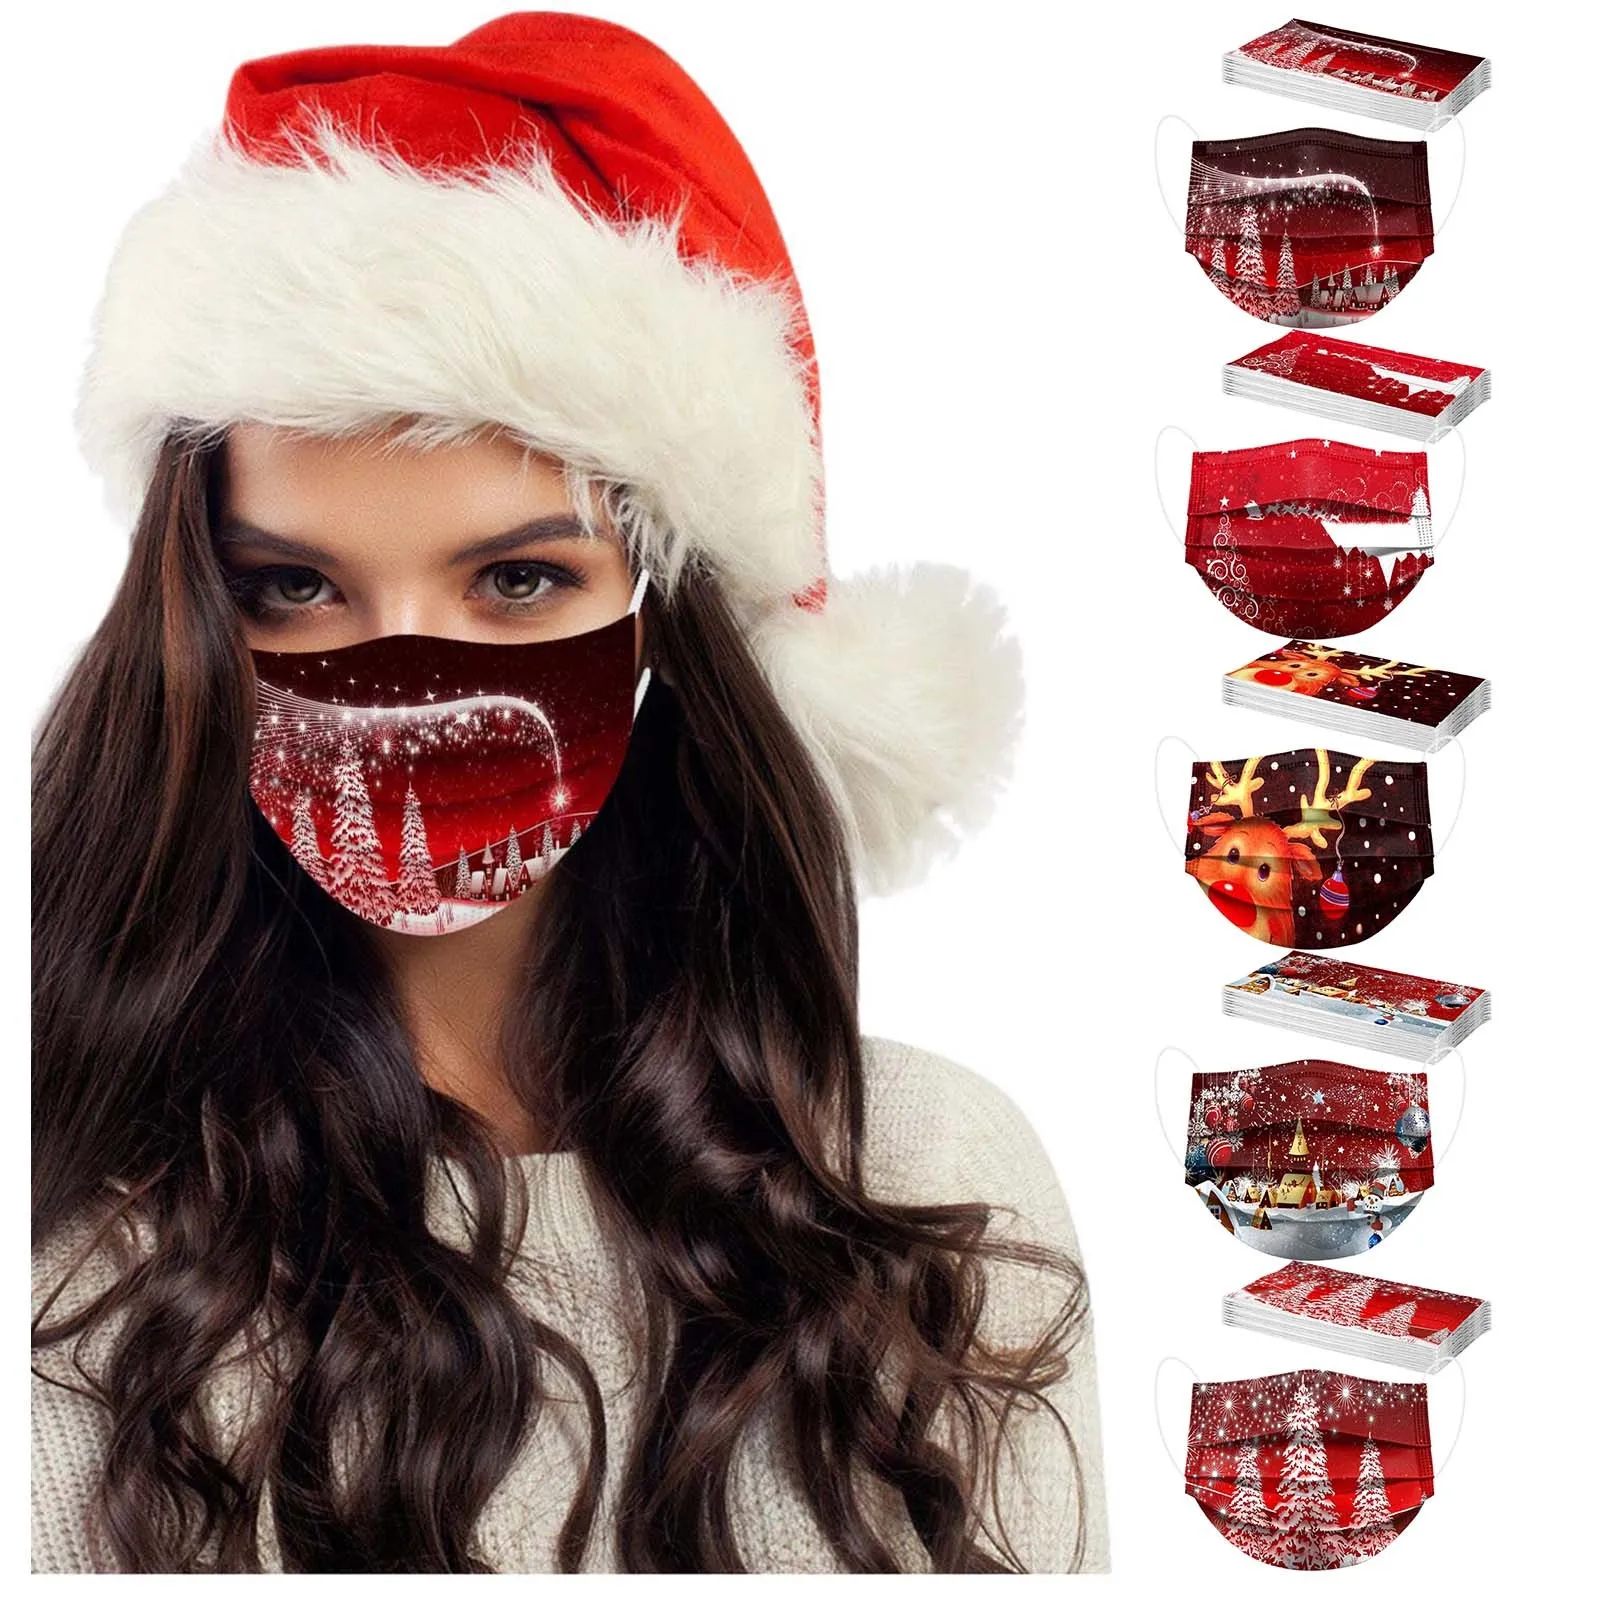 

50pc Adult Face Mask Disposable Face Mask Merry Christmas Printed 3ply Ear Loop Unisex Mouth Cover Mascarillas Halloween Cosplay